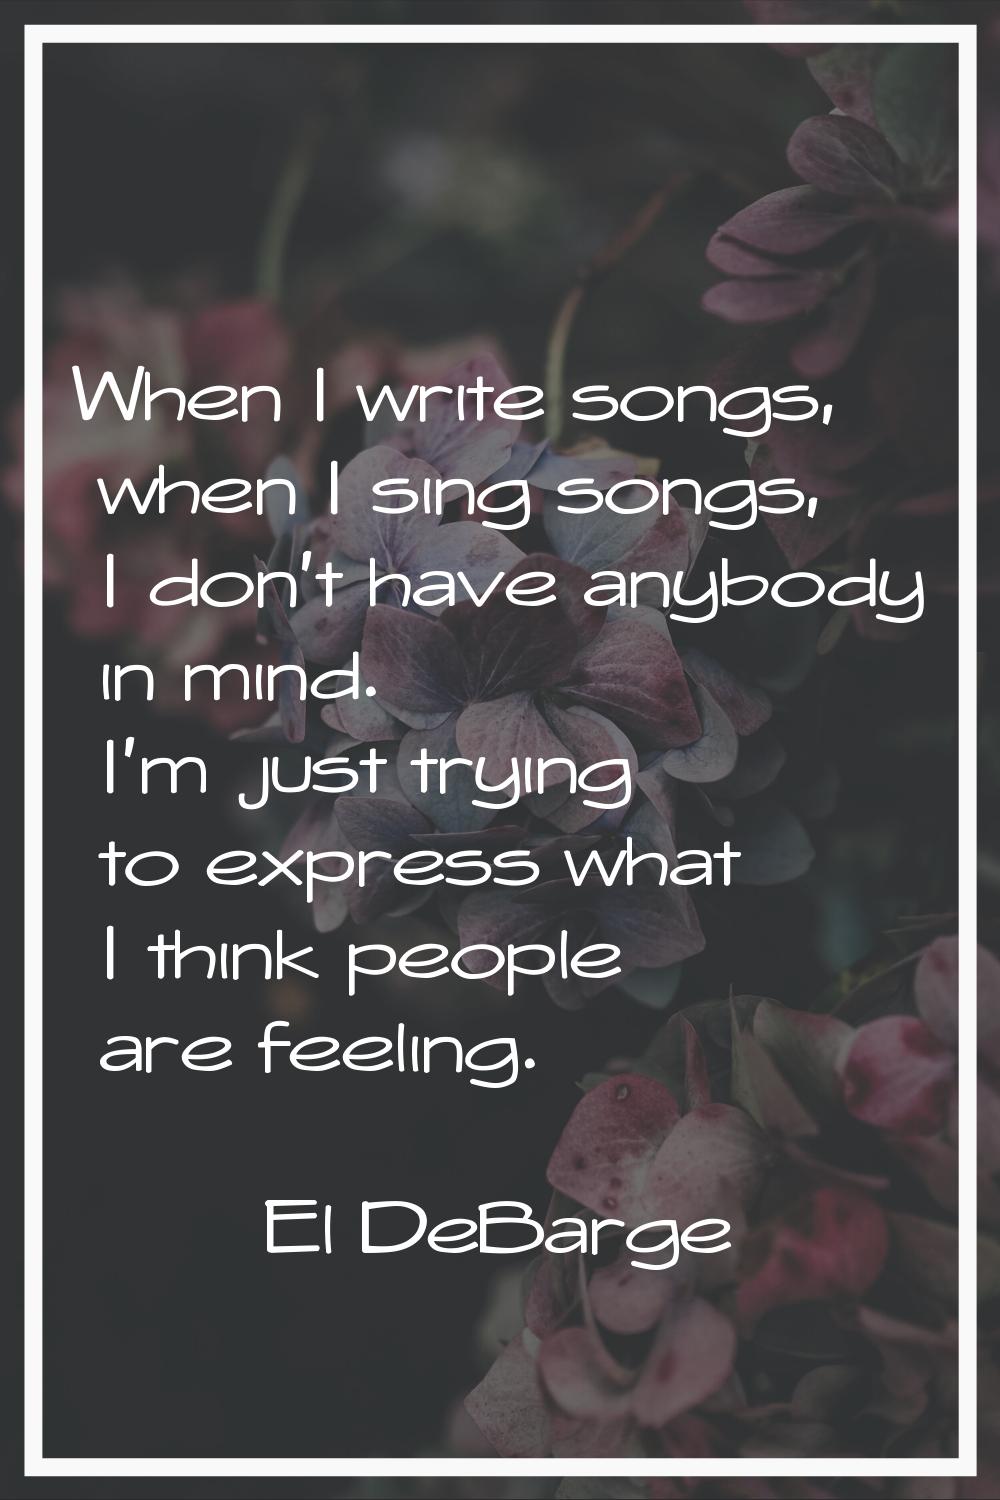 When I write songs, when I sing songs, I don't have anybody in mind. I'm just trying to express wha